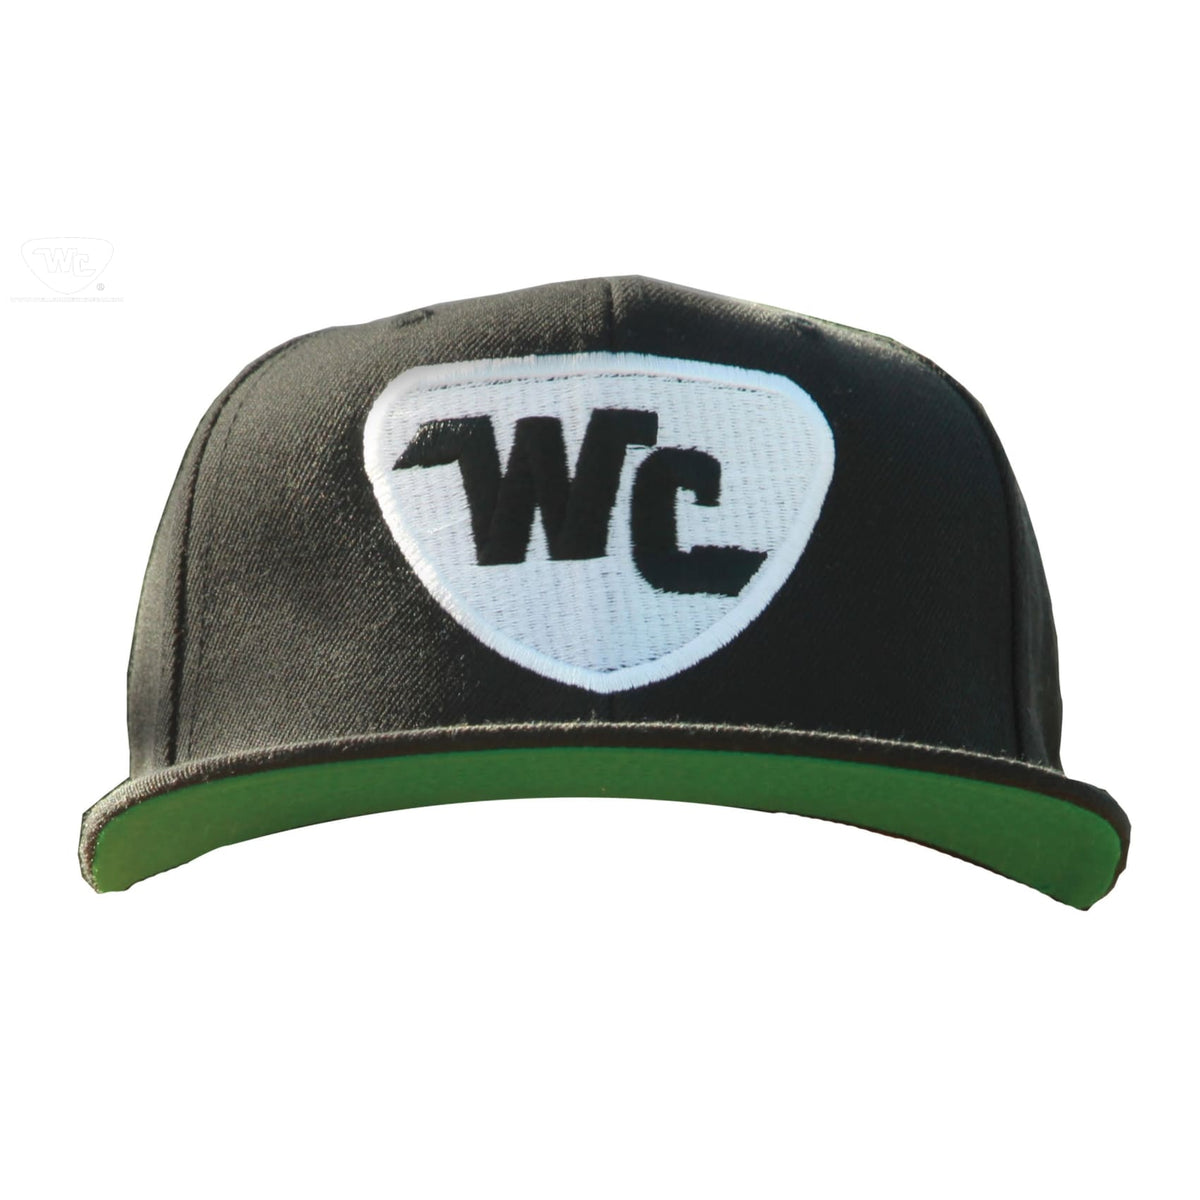 Well Connected Gear - Lifestyle Cap Snapback (Black)